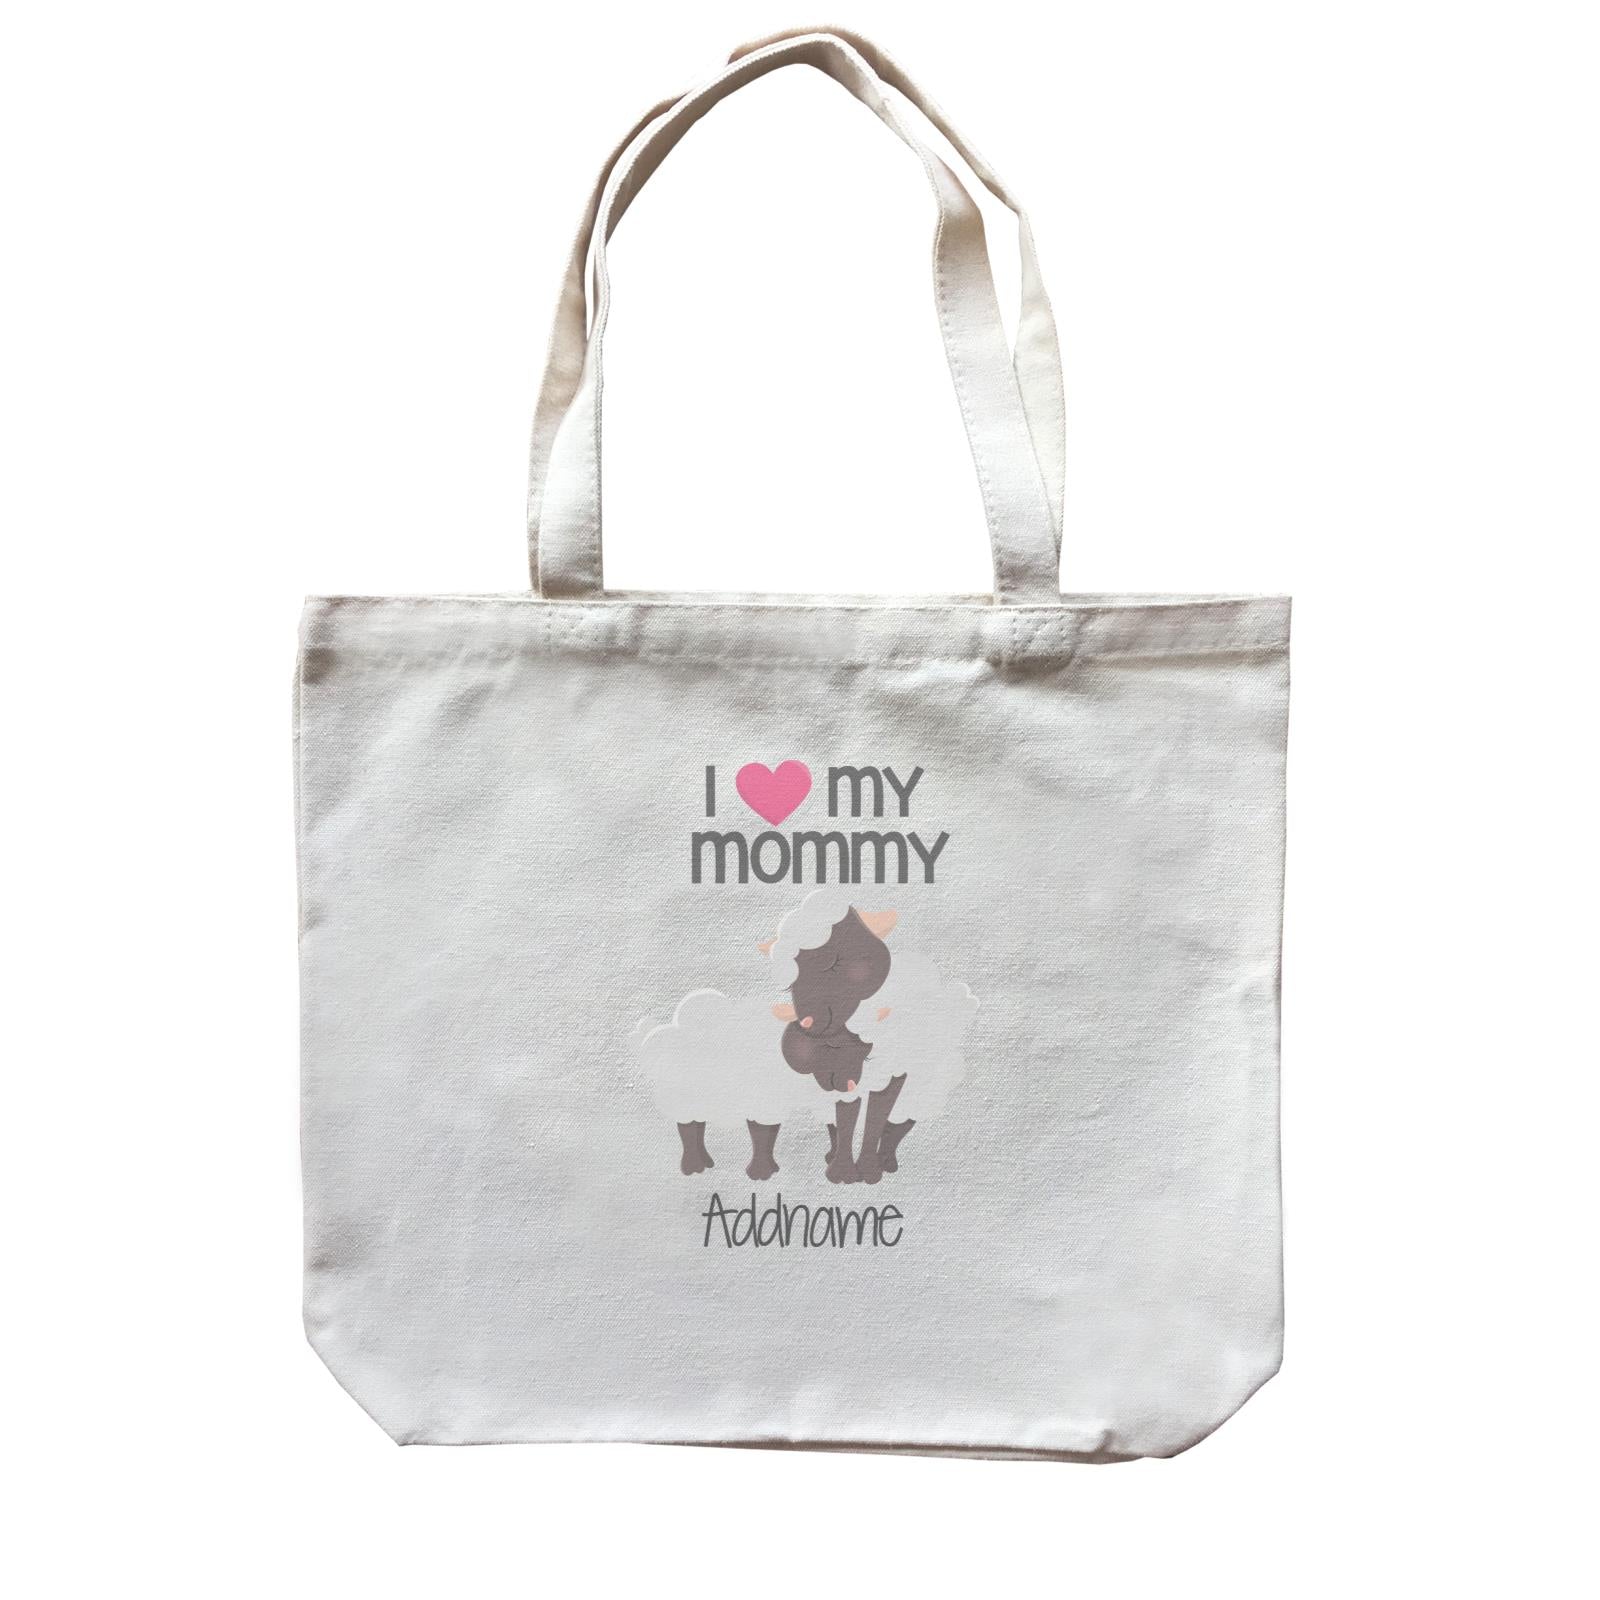 Animal &Loved Ones Sheep I Love My Mommy Addname Canvas Bag